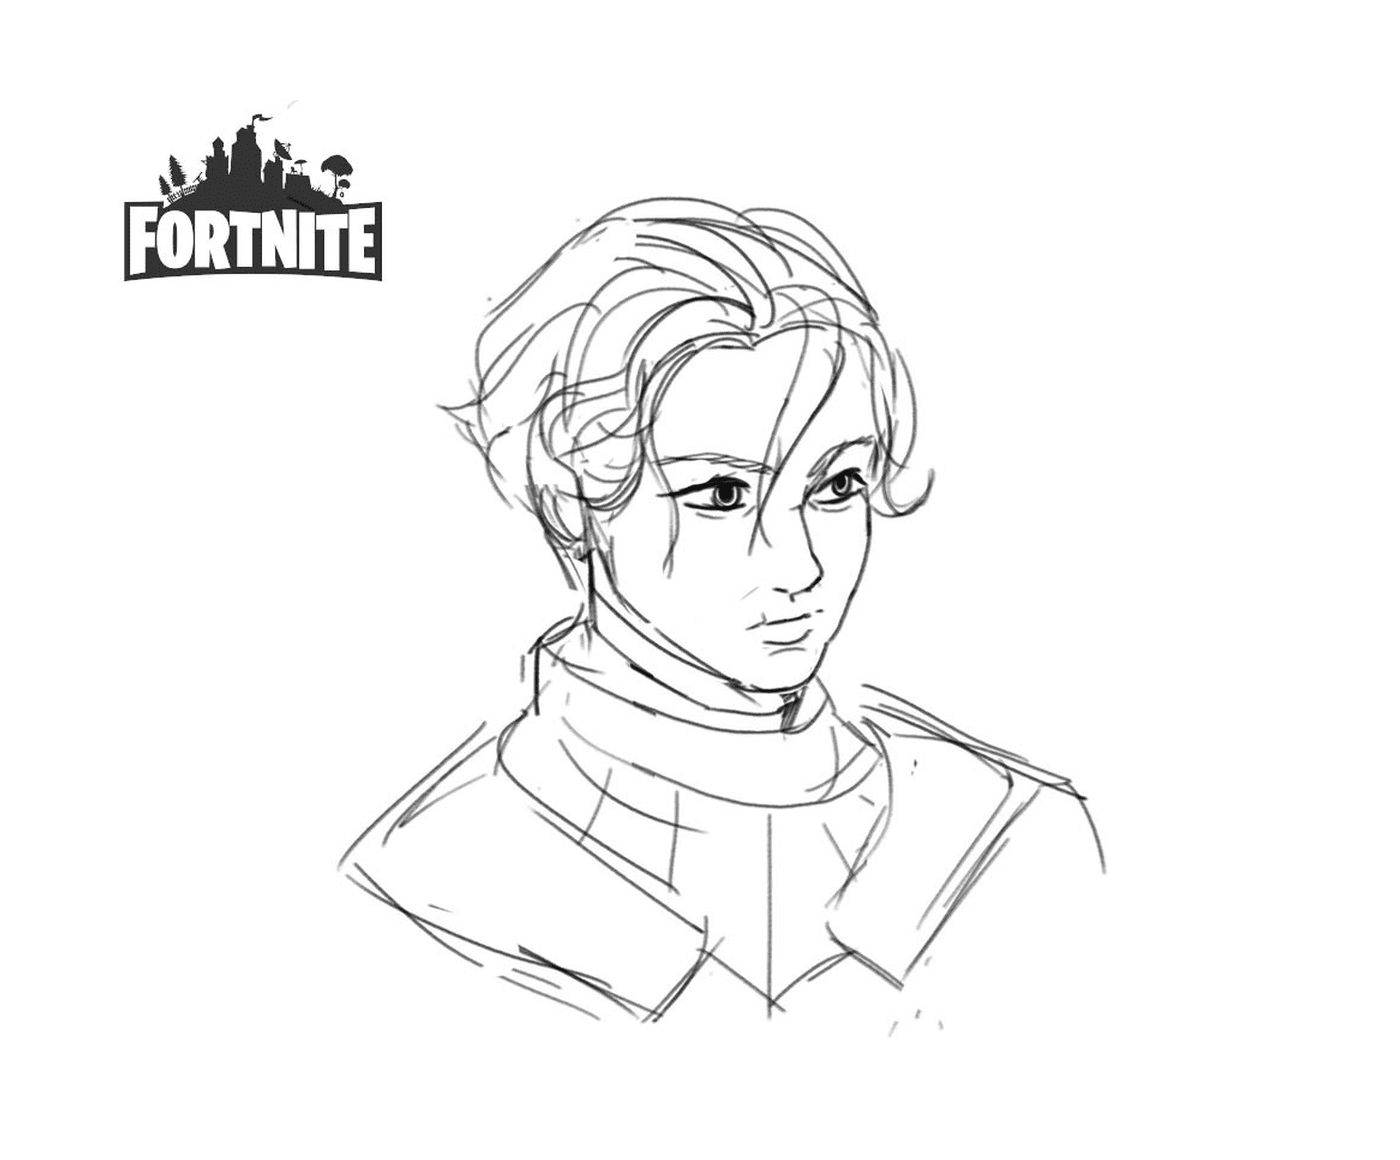  Person in costume in Fortnite Brienne of Tarth by shantftw on Tumblr 